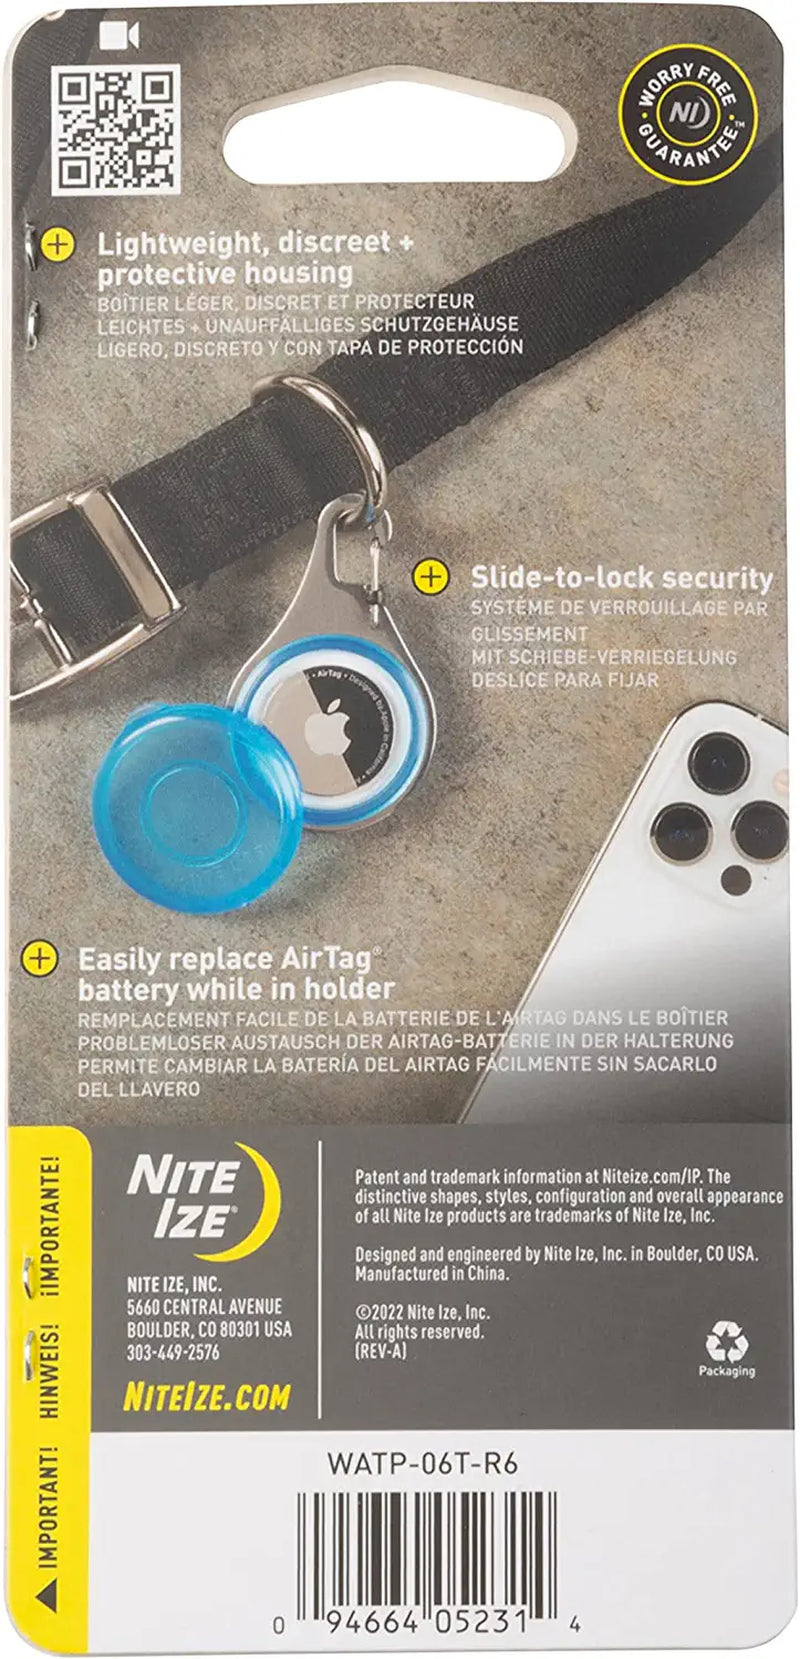 Nite Ize, Inc. WATP-06T-R6 Nite IZE Wearabout Clippable, Apple Airtag Locking Carabiner for Pets, Smoke Tracker Holder